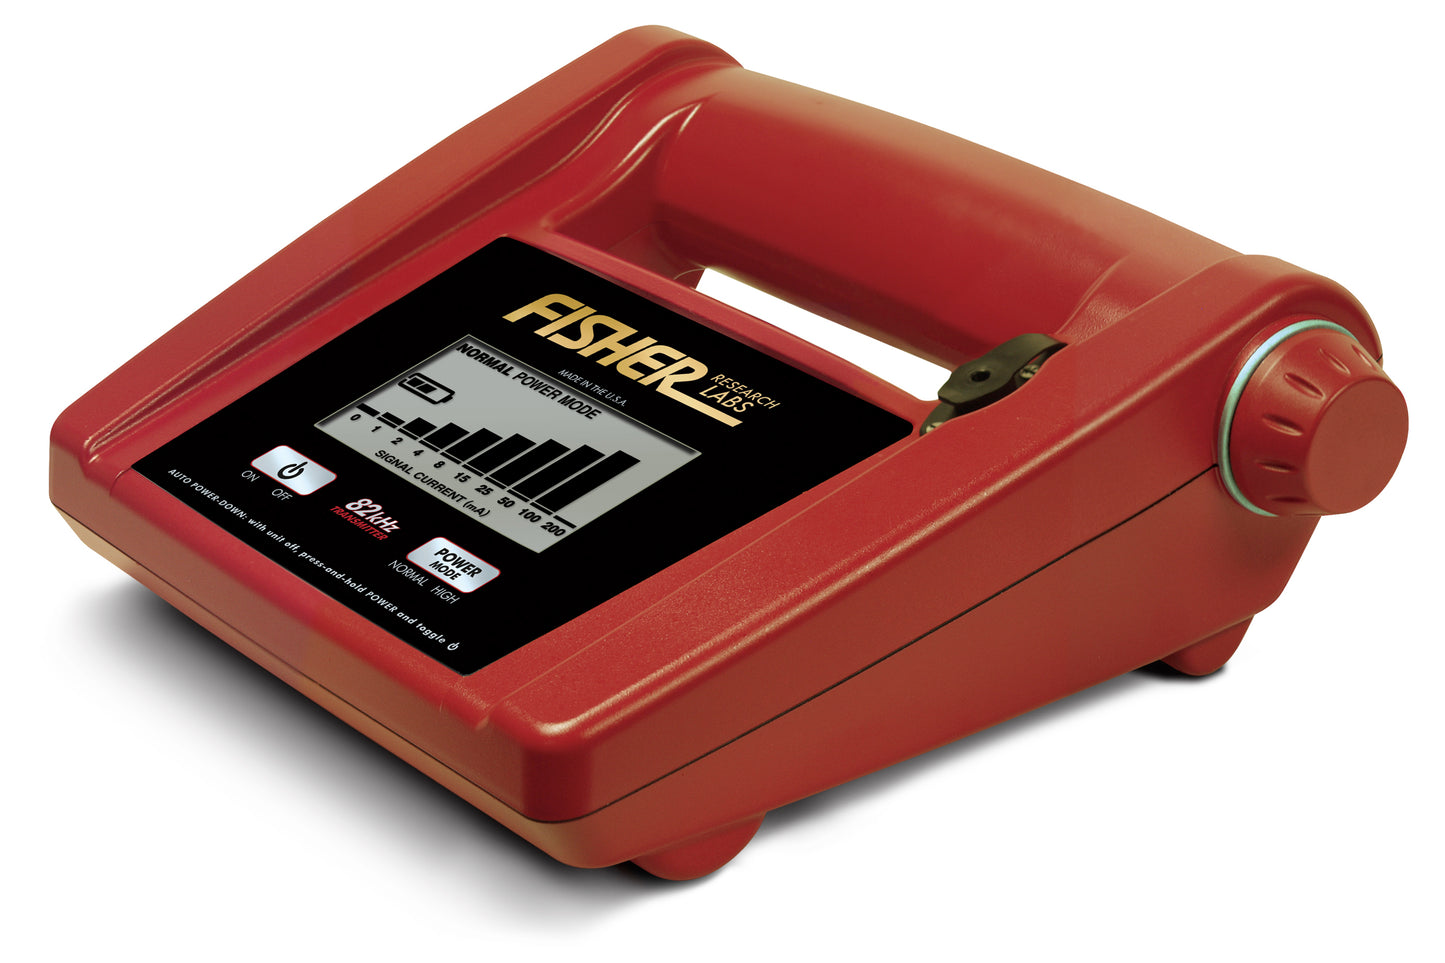 Fisher TW82 Digital Line Tracer: Single-Frequency Detection